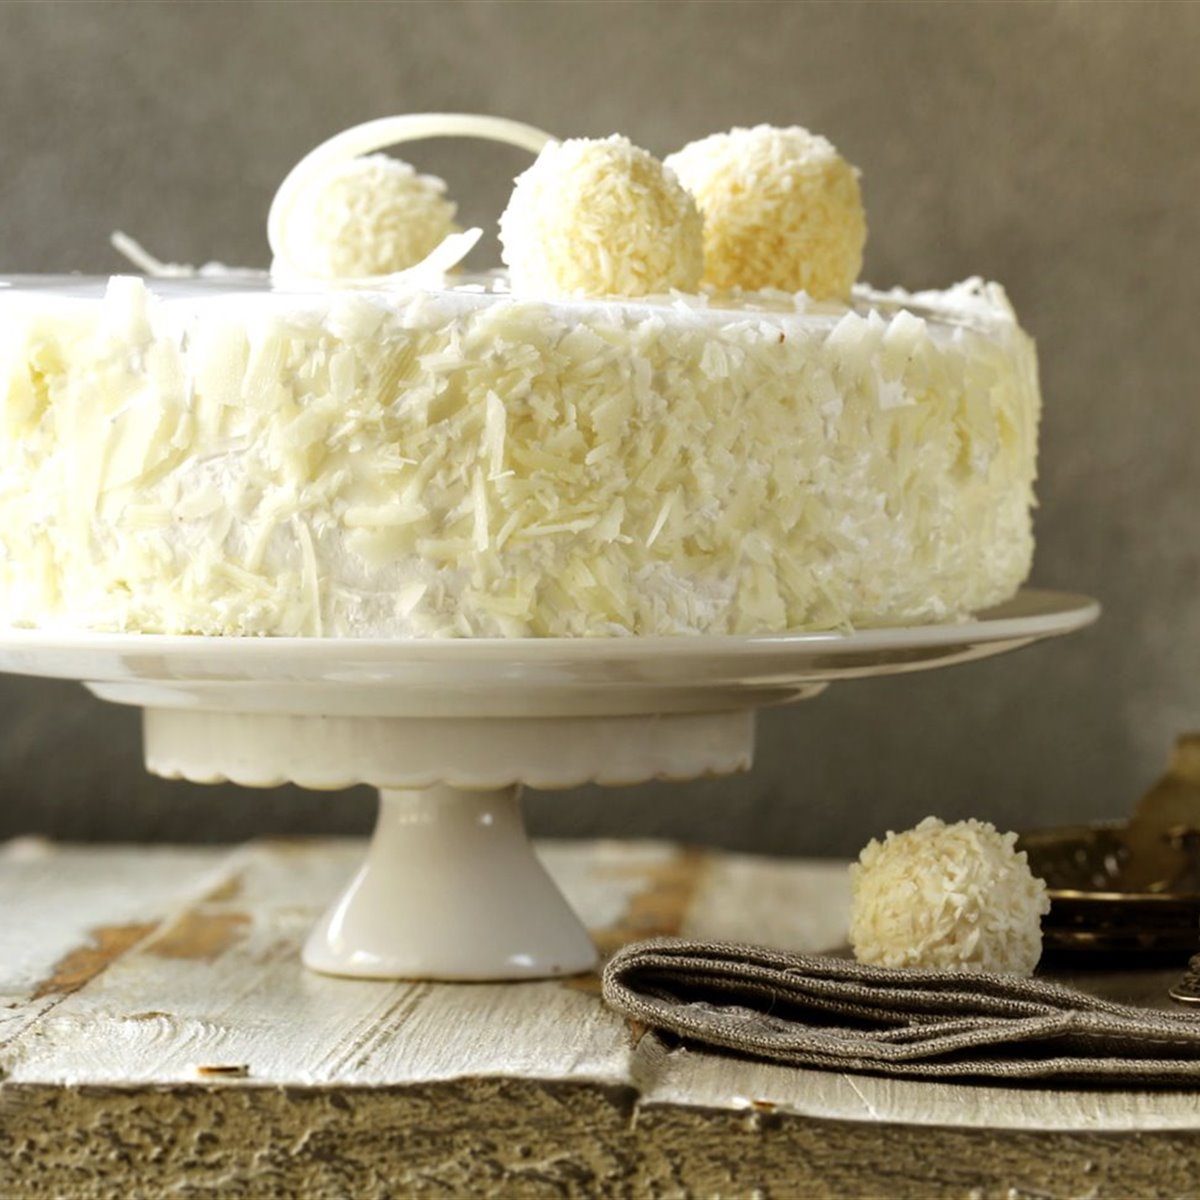 Coconut cake catches husbands